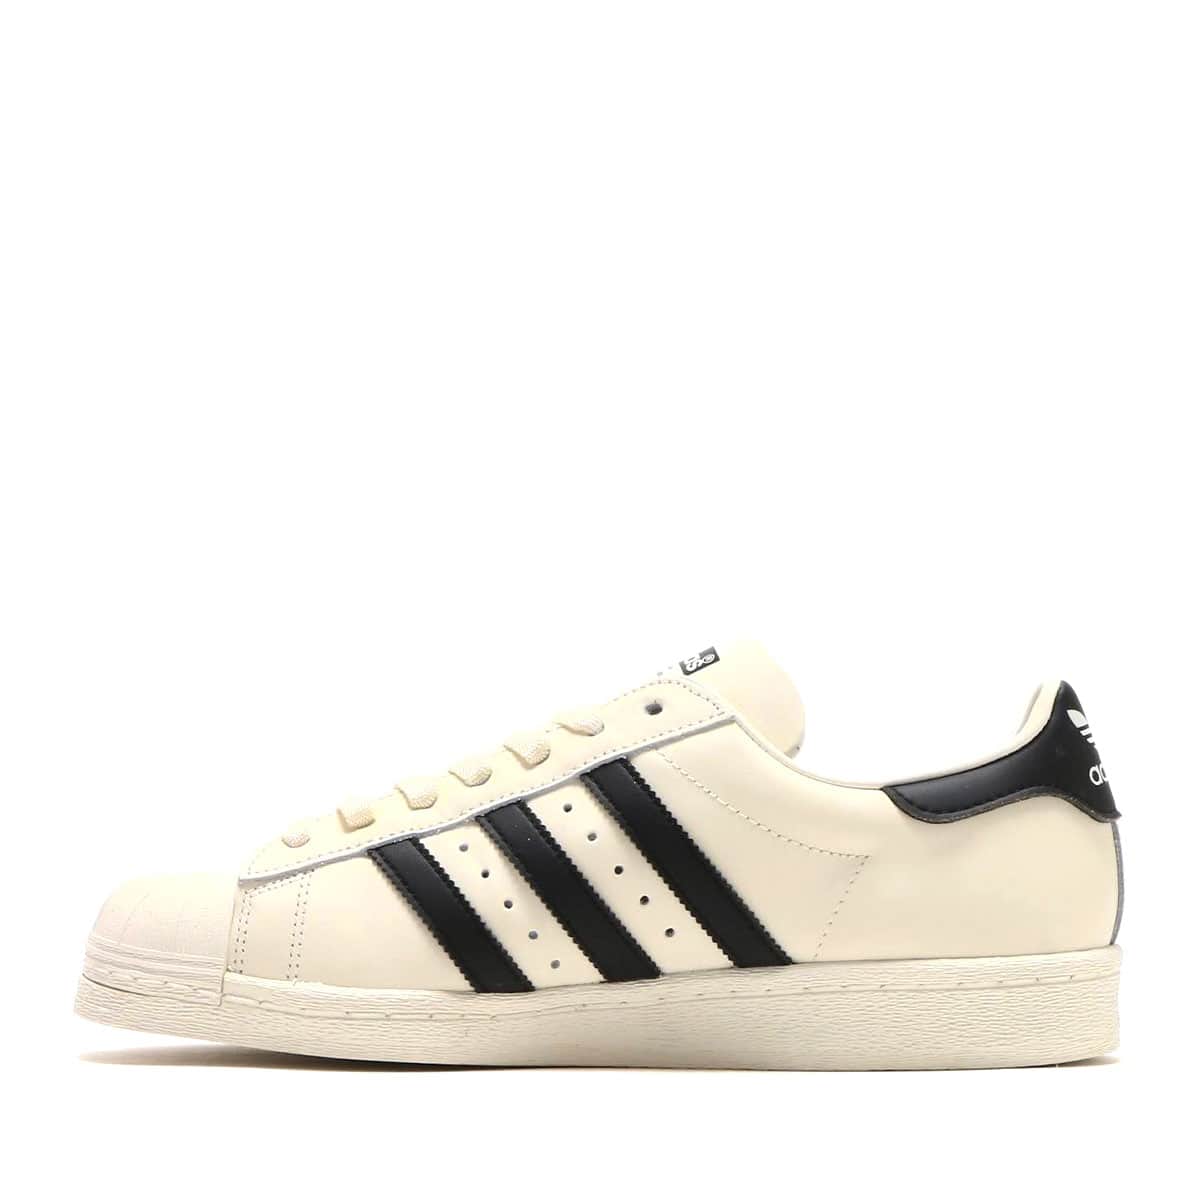 adidas SUPERSTAR 82 CLOUD WHITE/CORE BLACK/OFF WHITE 22SS-S